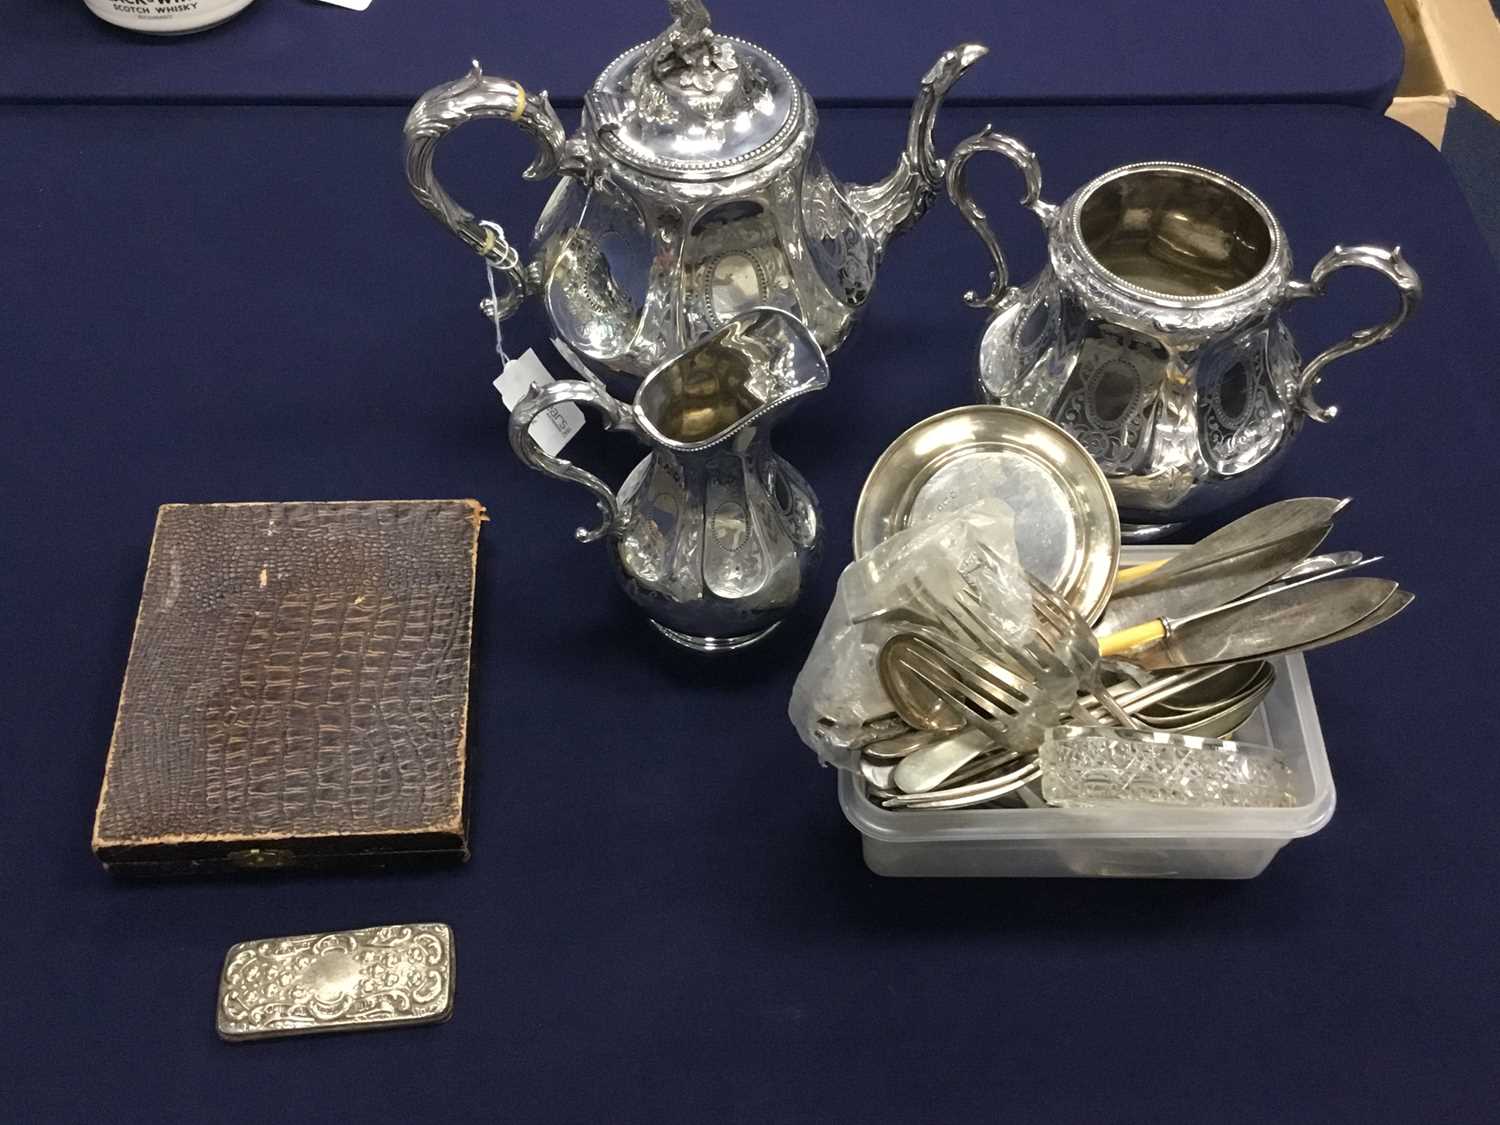 Lot 105 - A SILVER PLATED TEA SERVICE, ALONG WITH SILVER AND PLATED WARE